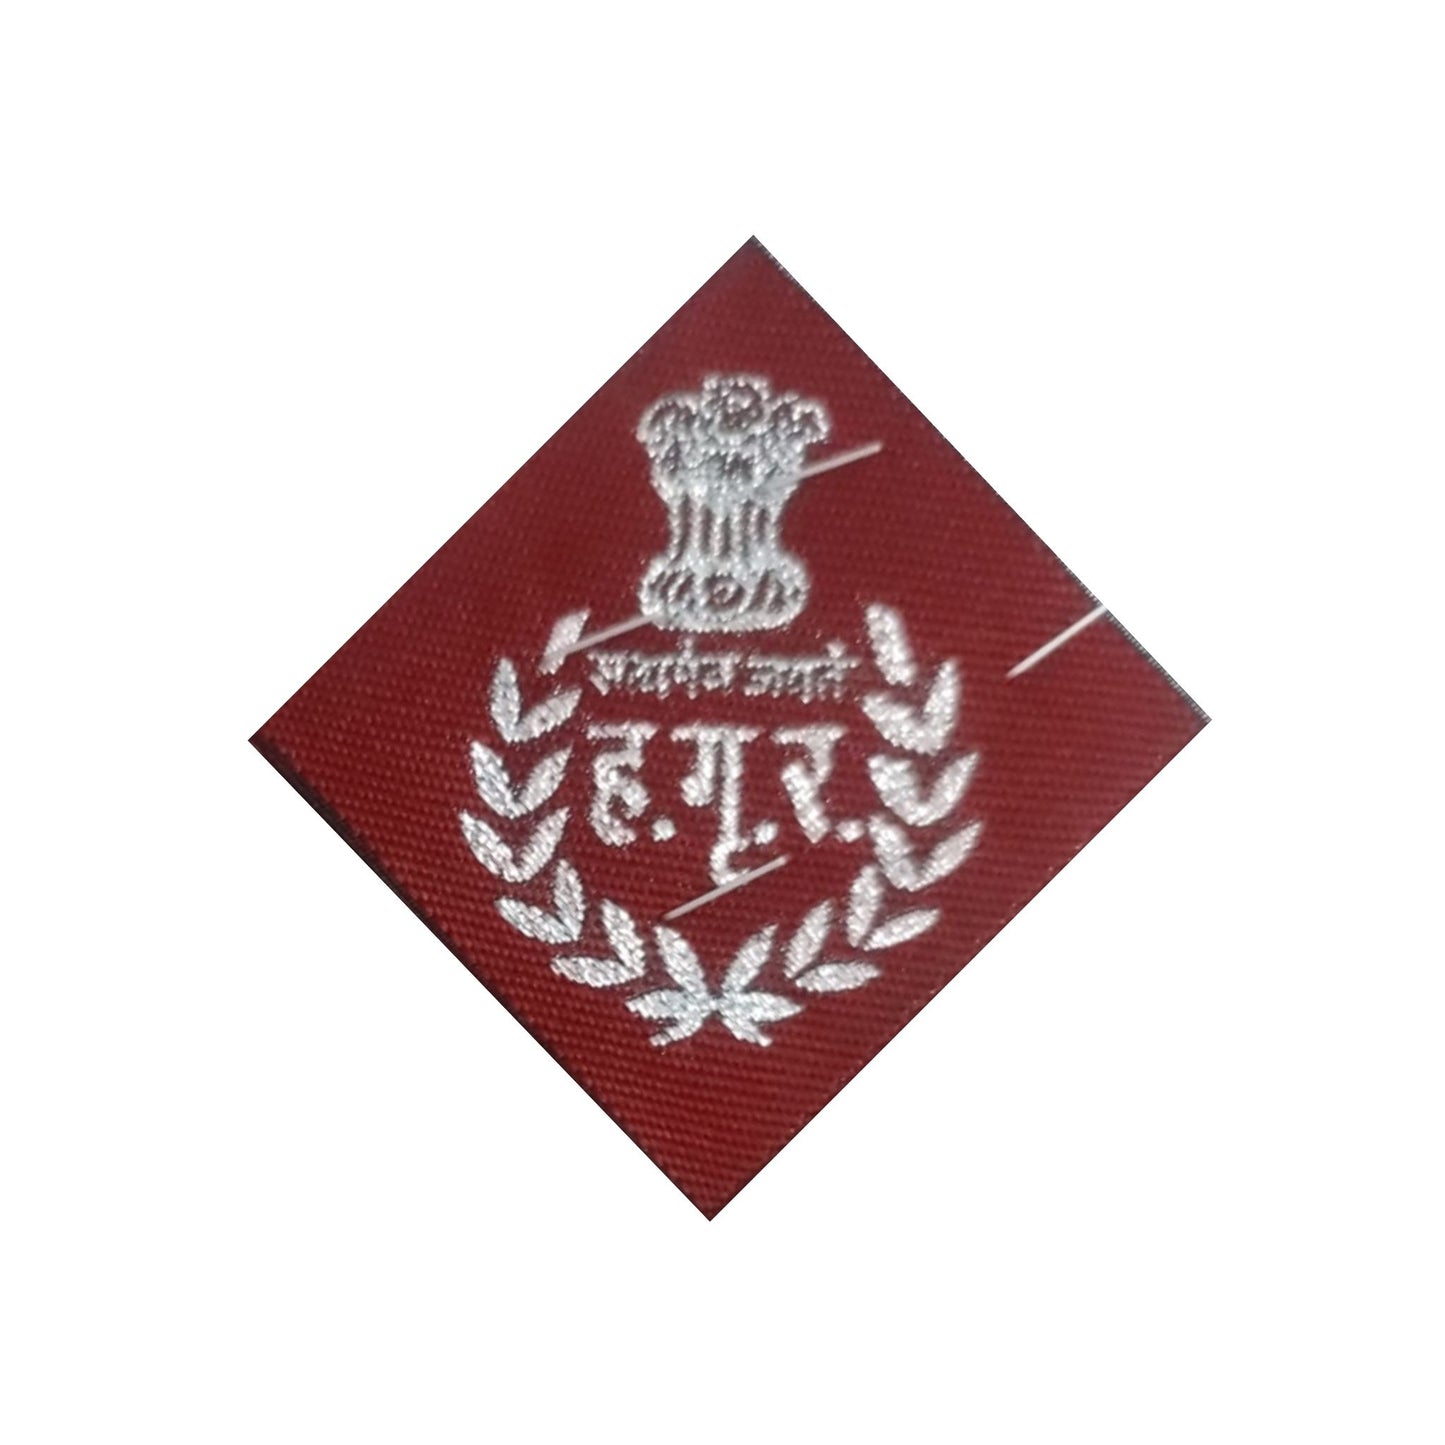 FORMATION SIGN/INSIGNIA -HARYANA POLICE/HOME GUARDS/CIVIL DEFENCE